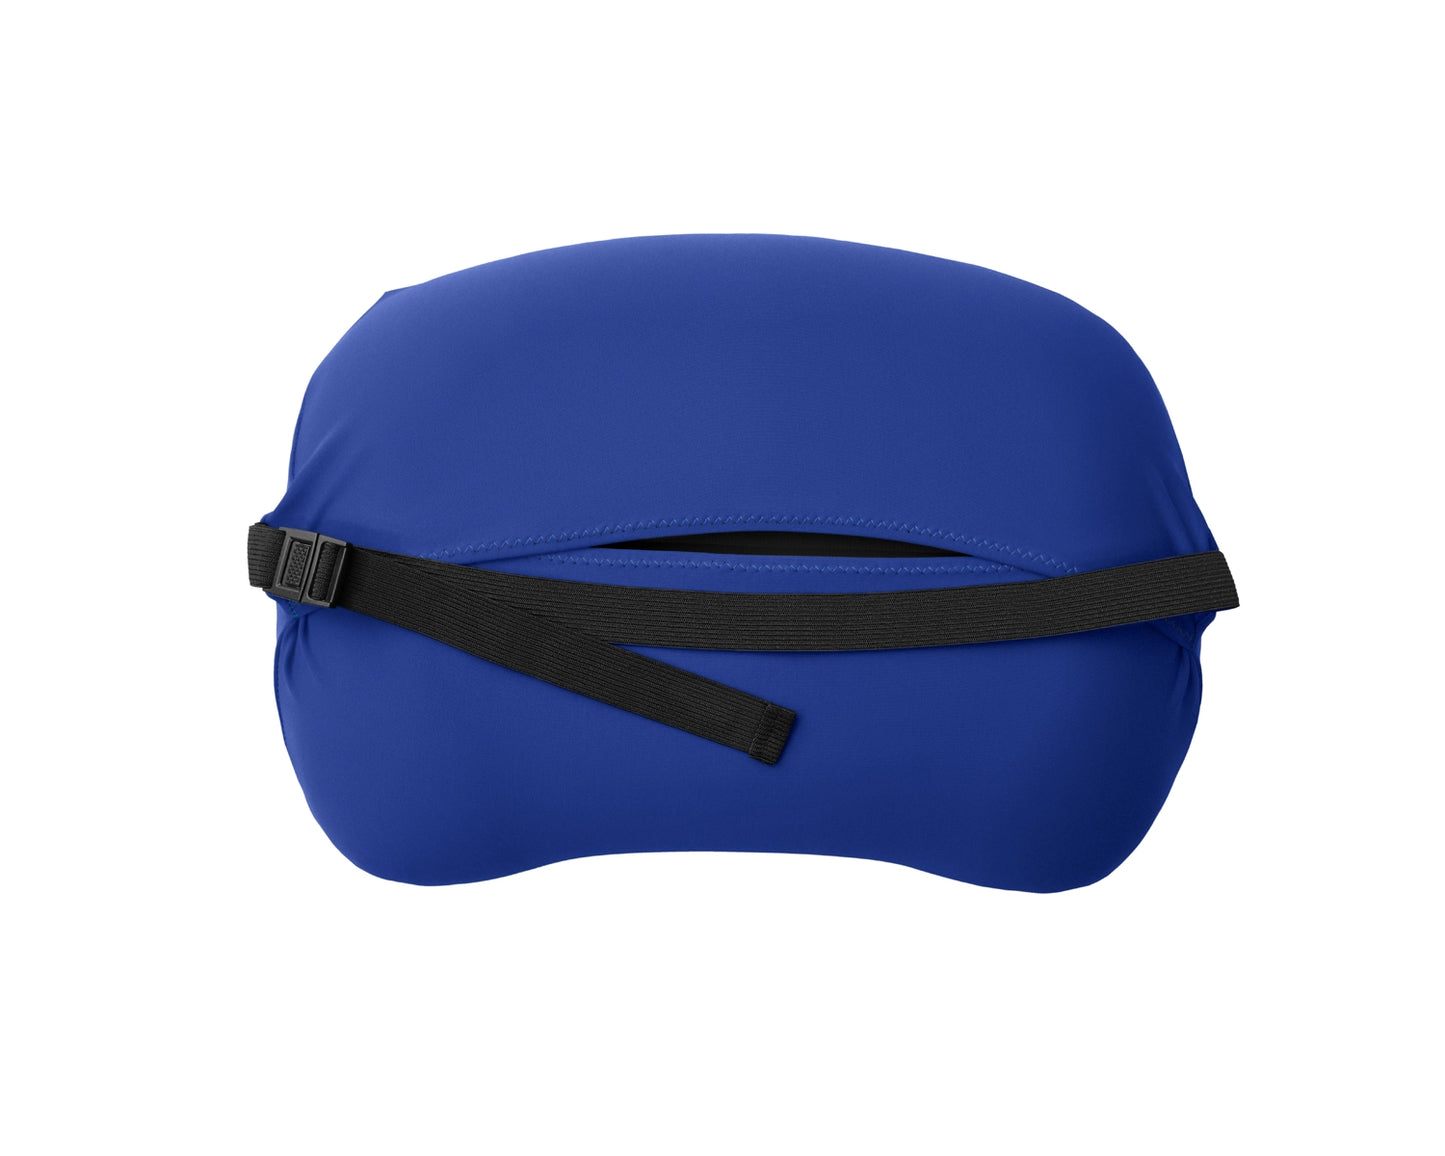 Trifold enclosure and strap of small in blue Pillow Strap to securely hold camp pillow to sleeping pad.